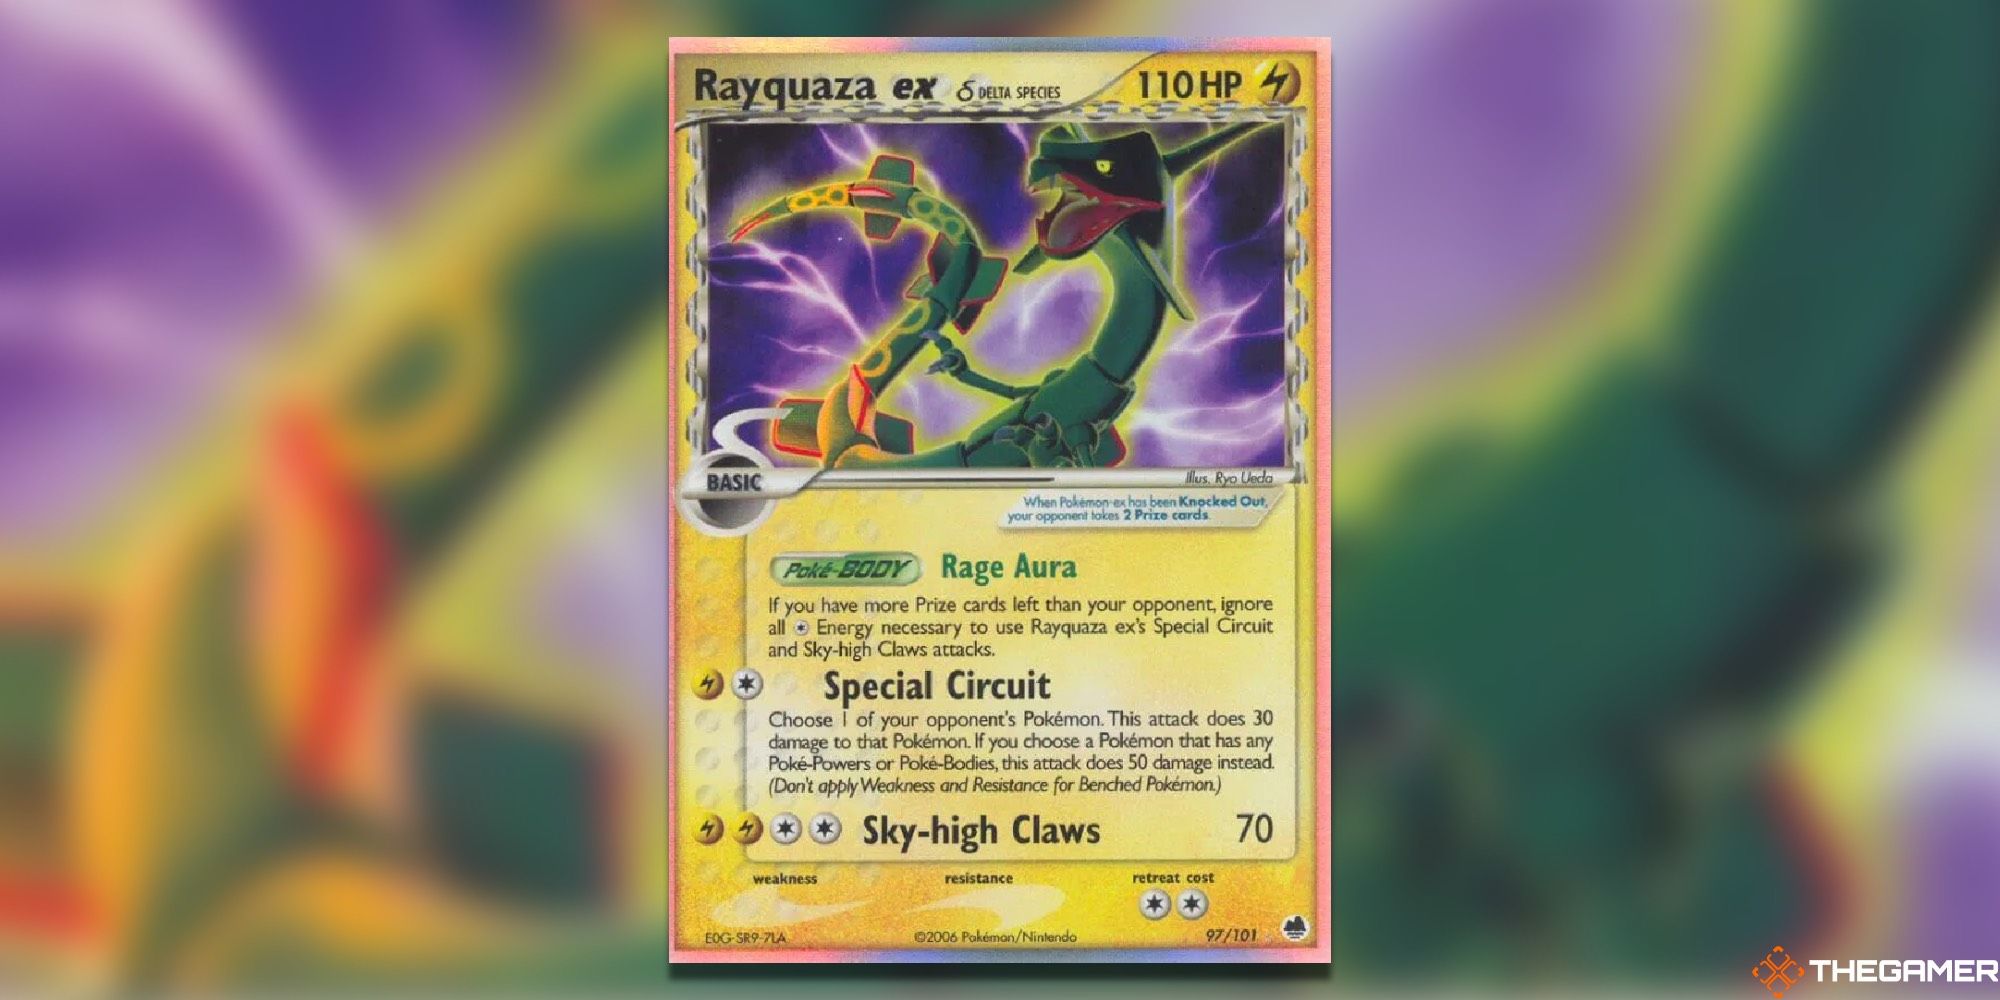 Rayquaza's card art from EX Dragon Frontiers.